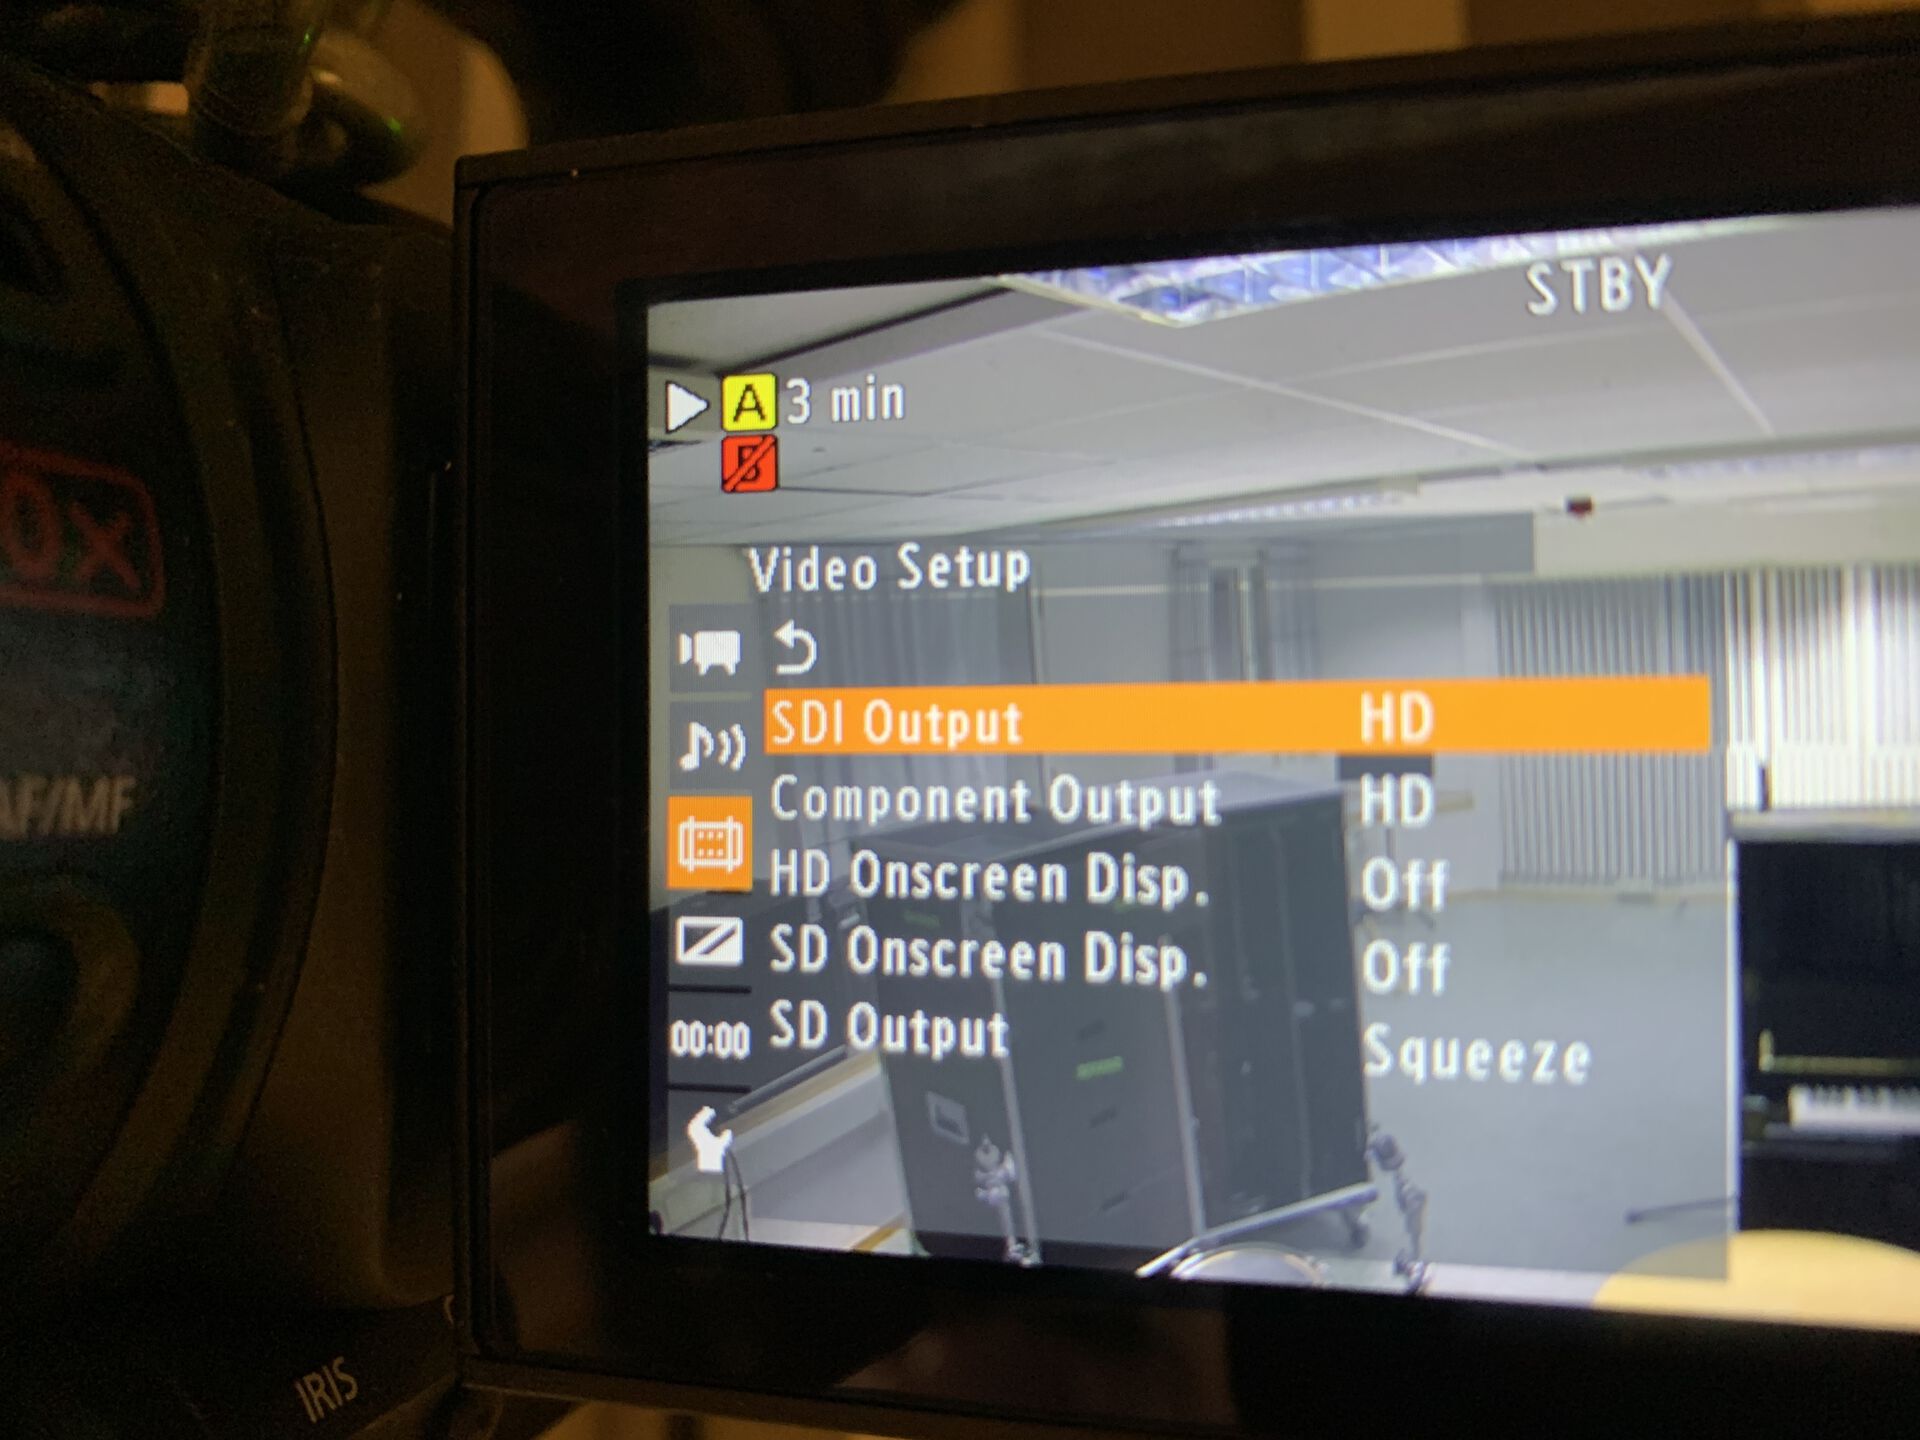 Image showing the camera settings on the Sony camera we use for visual feedback from samspill 2